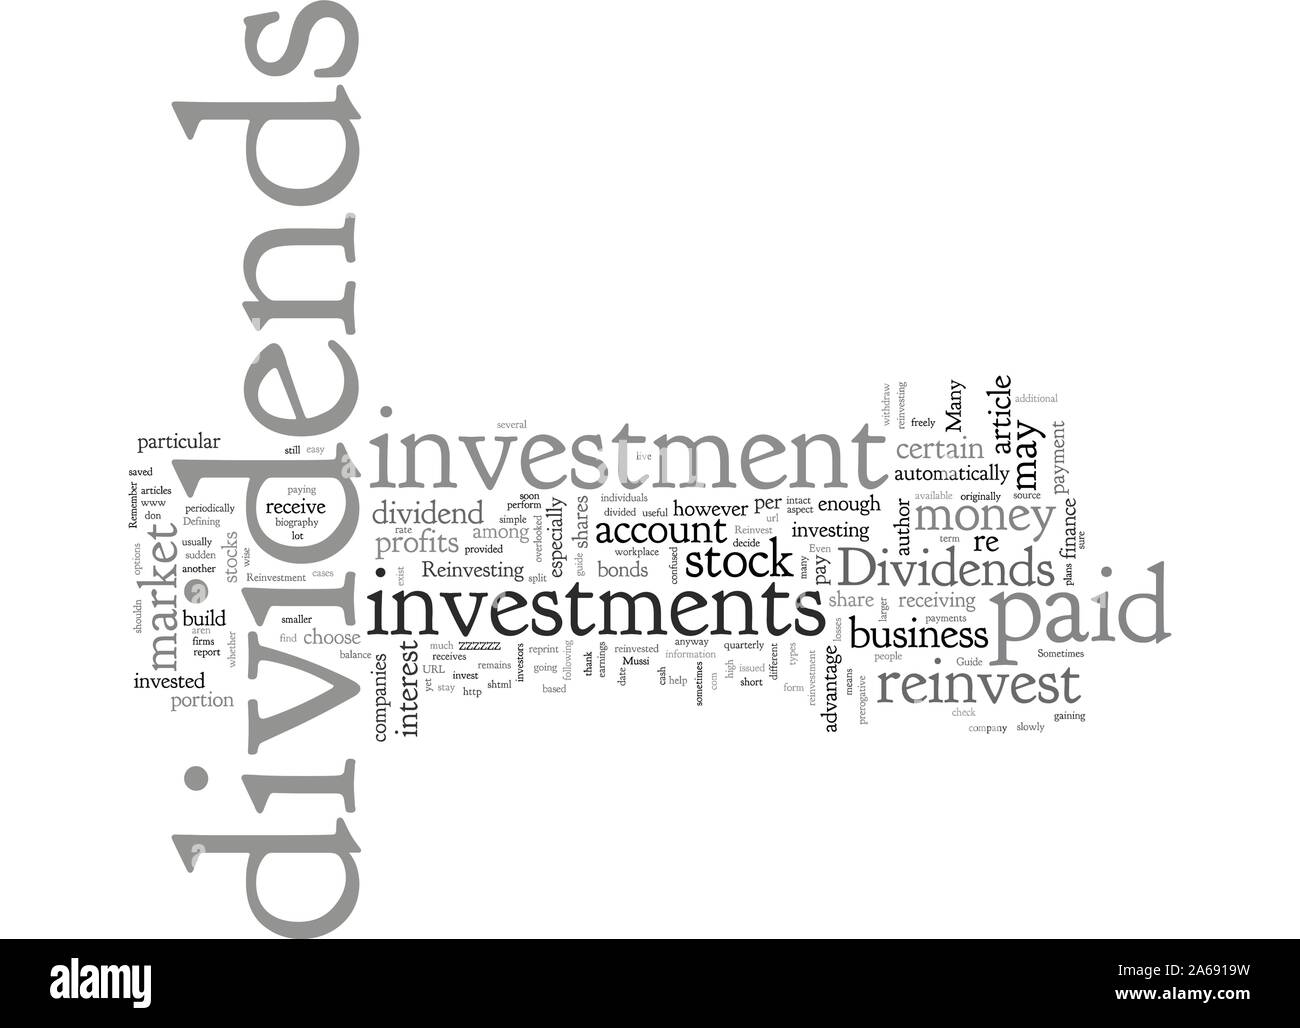 A Guide to Dividends and Reinvestment Stock Vector